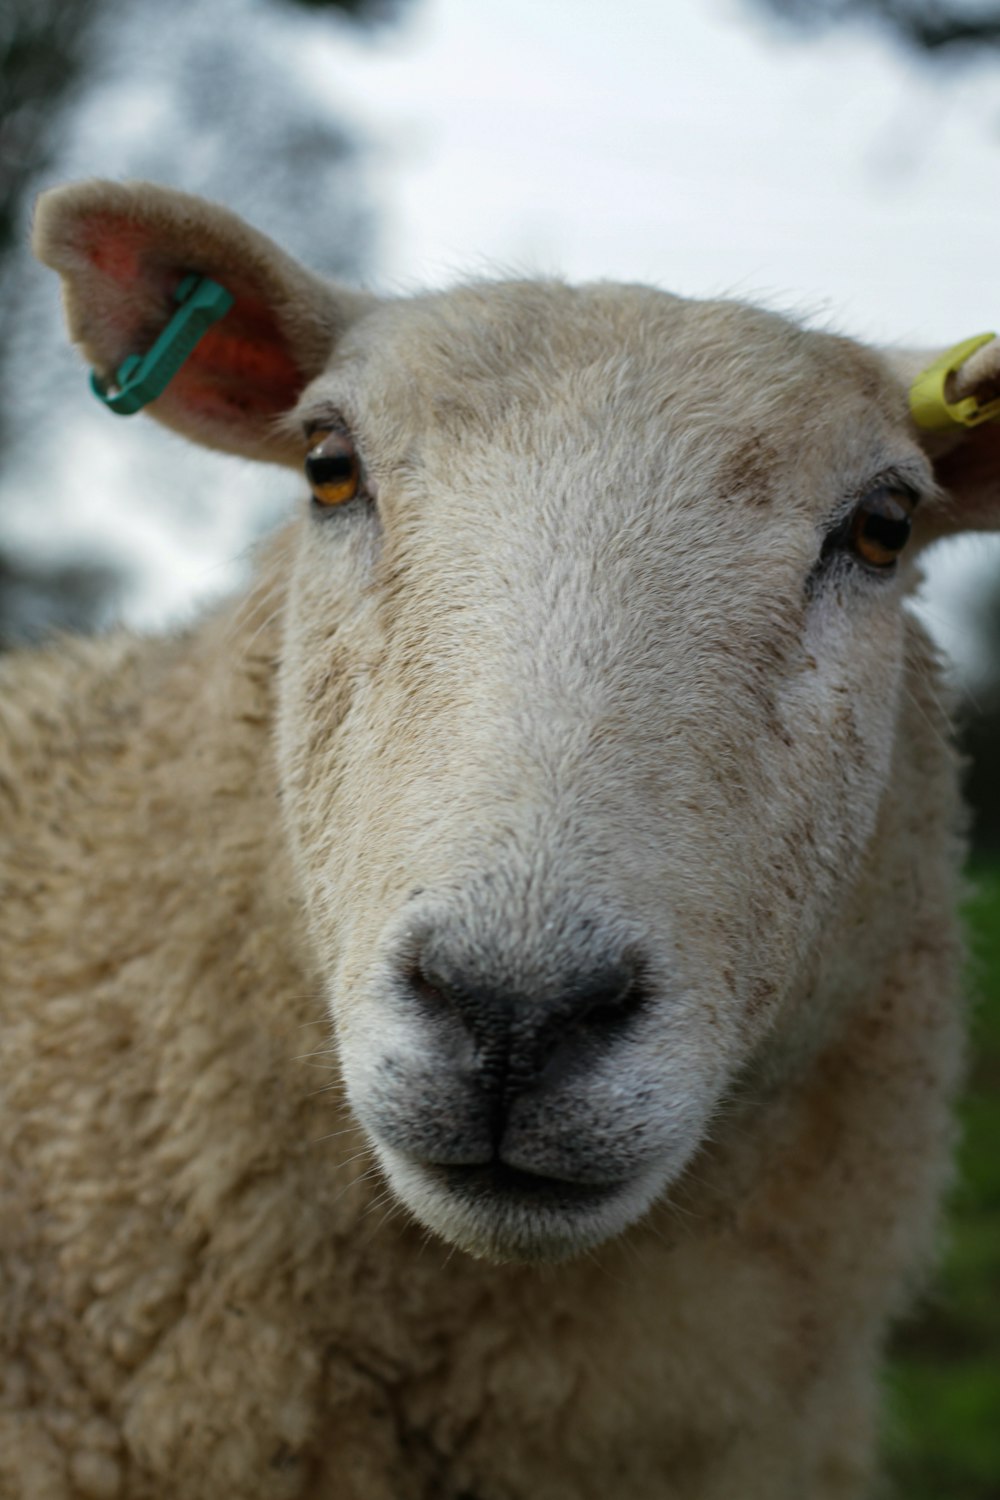 a close up of a sheep with a tag on its ear